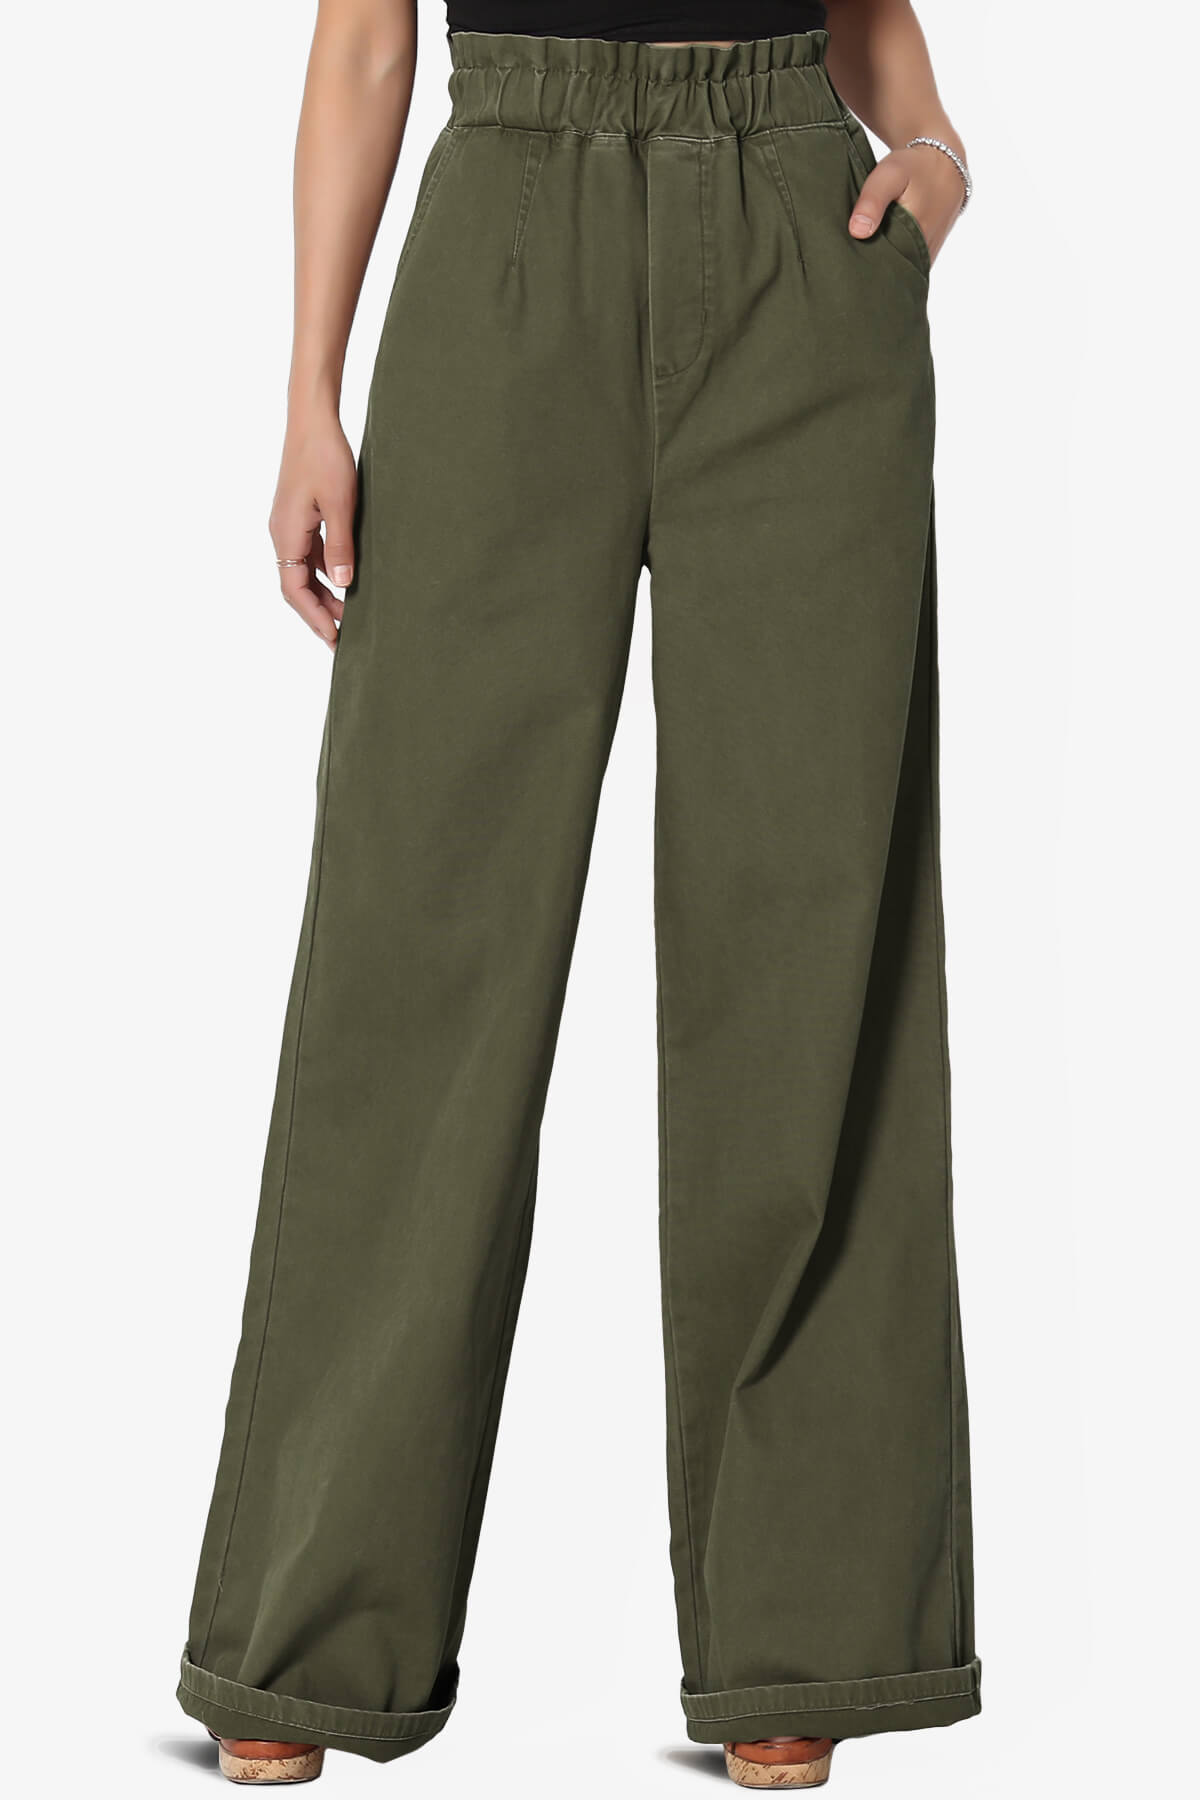 Load image into Gallery viewer, Fateful Twill High Waist Wide Leg Pants OLIVE_1
